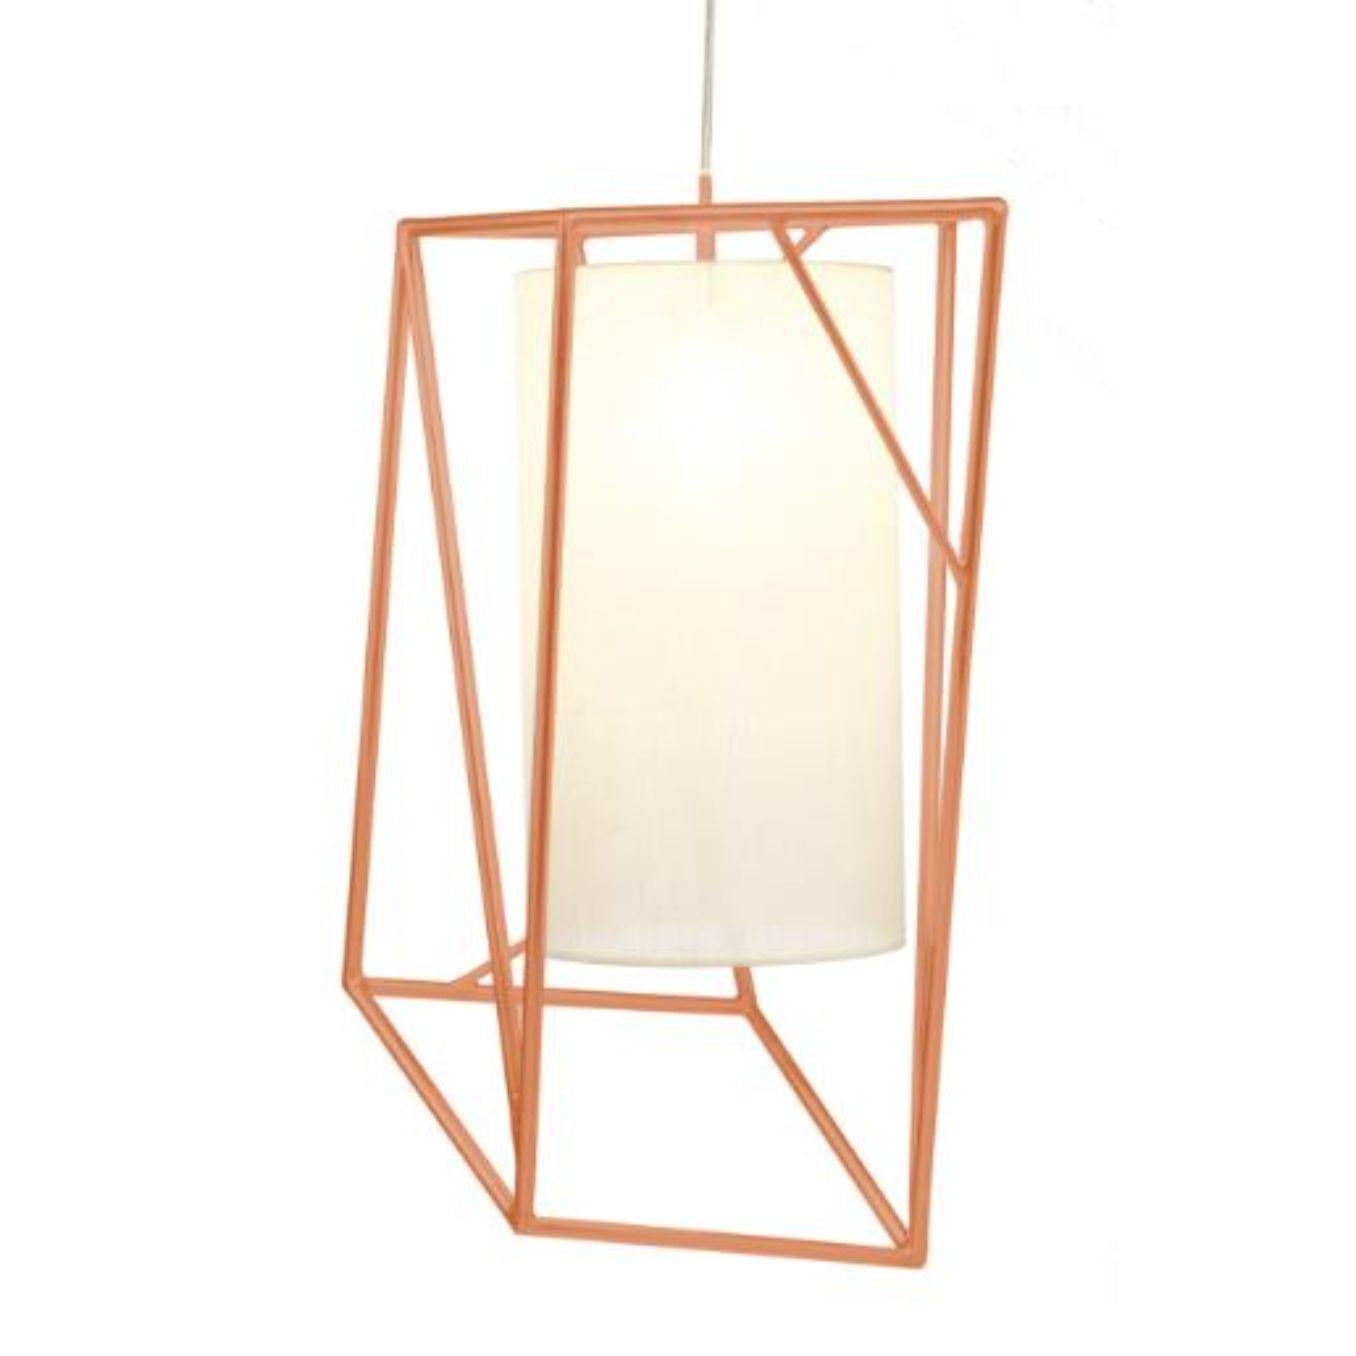 Salmon Star II suspension lamp by Dooq
Dimensions: W 45 x D 45 x H 72 cm
Materials: lacquered metal, polished or satin metal.
Also available in different colors and materials.

Information:
230V/50Hz
E27/1x20W LED
120V/60Hz
E26/1x15W